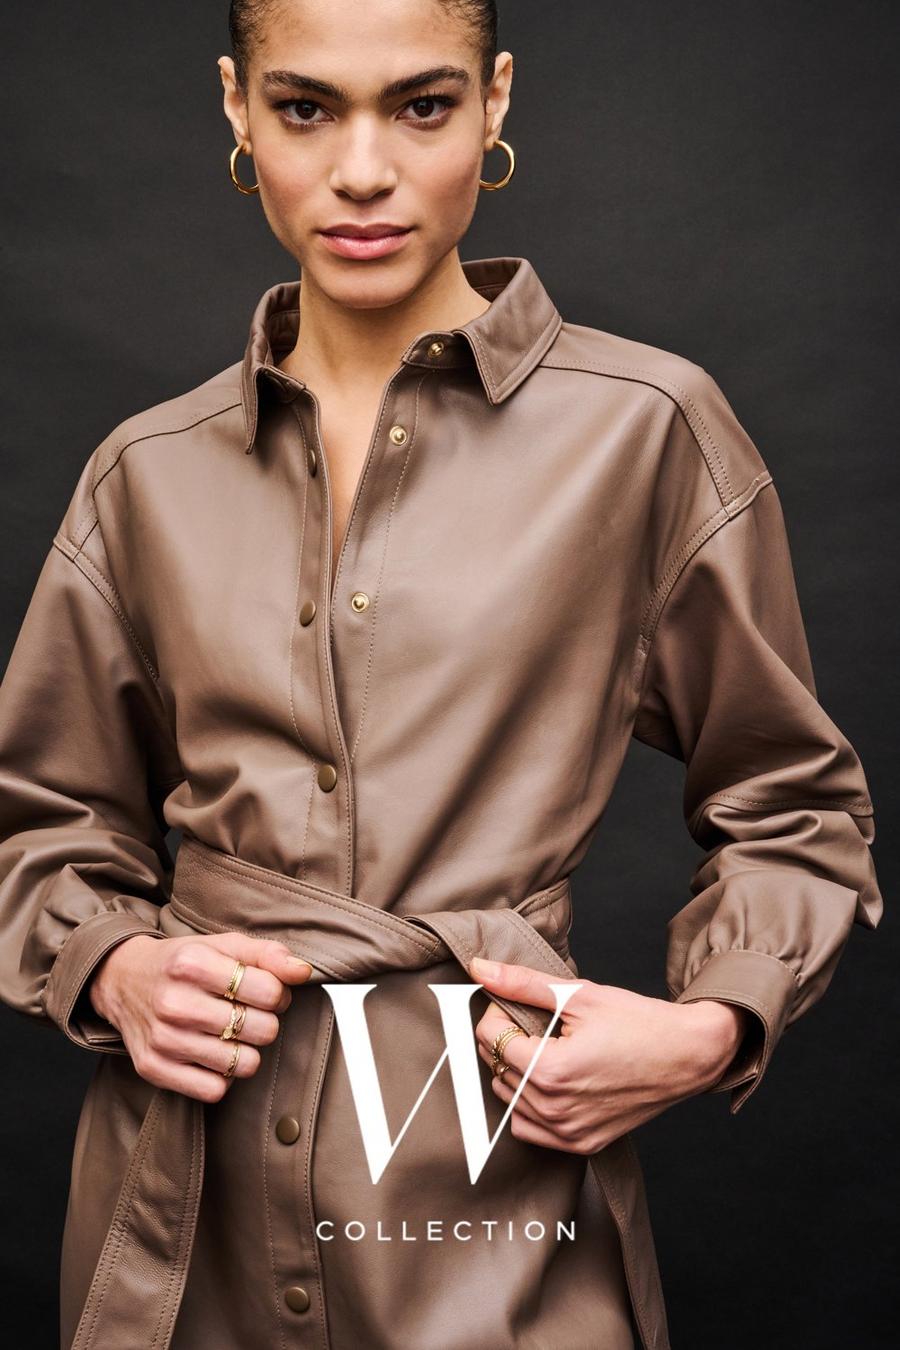 Belted Leather Shirt Dress